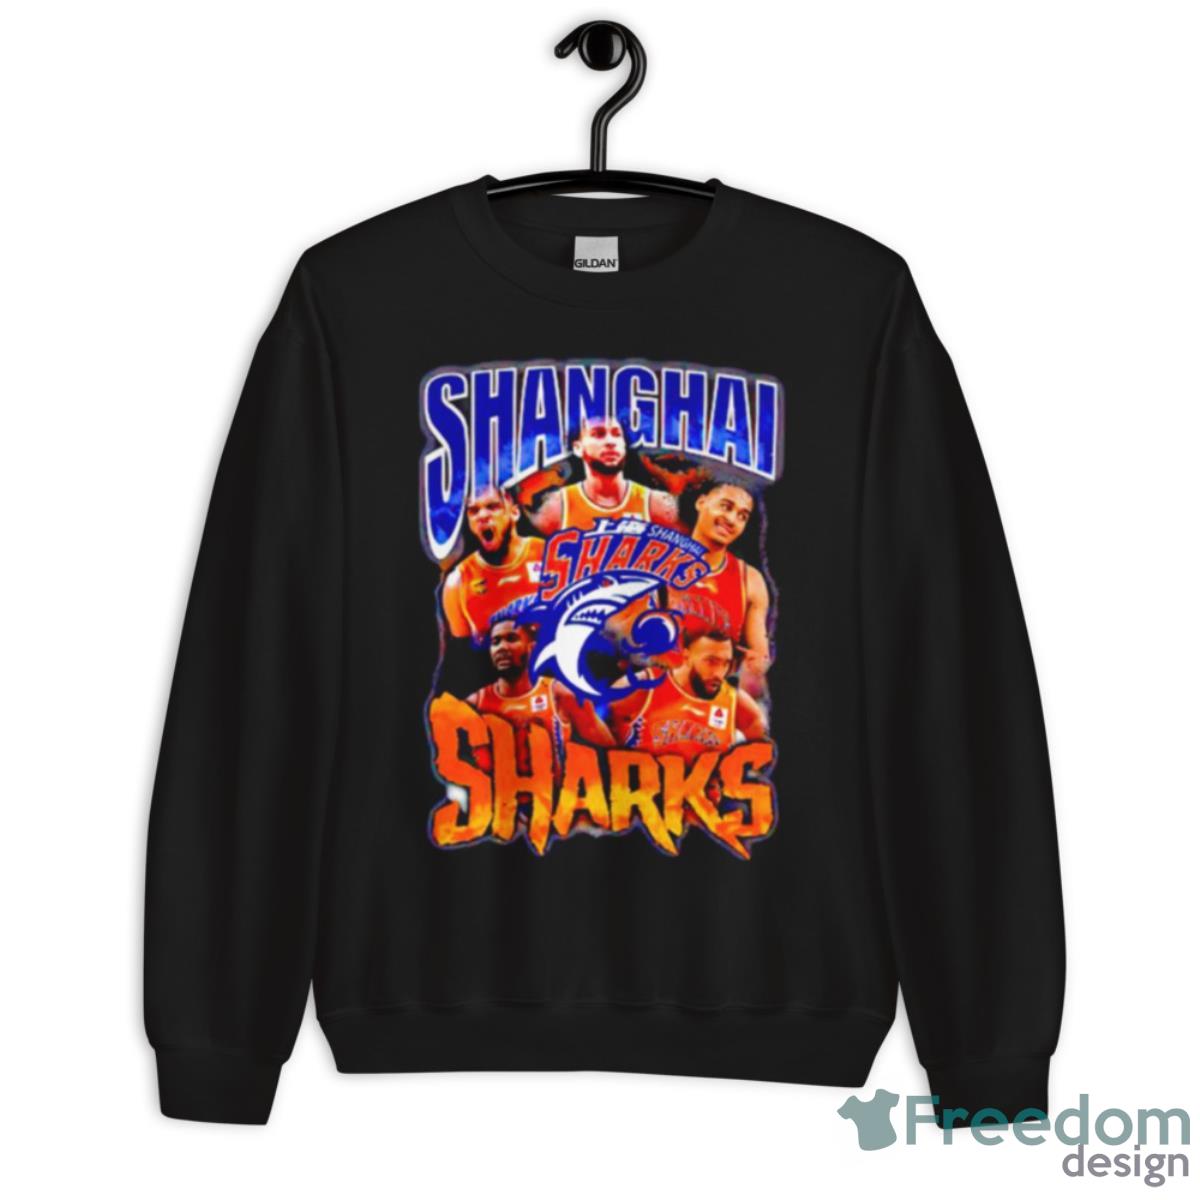 Shanghai Sharks players picture collage shirt - Limotees